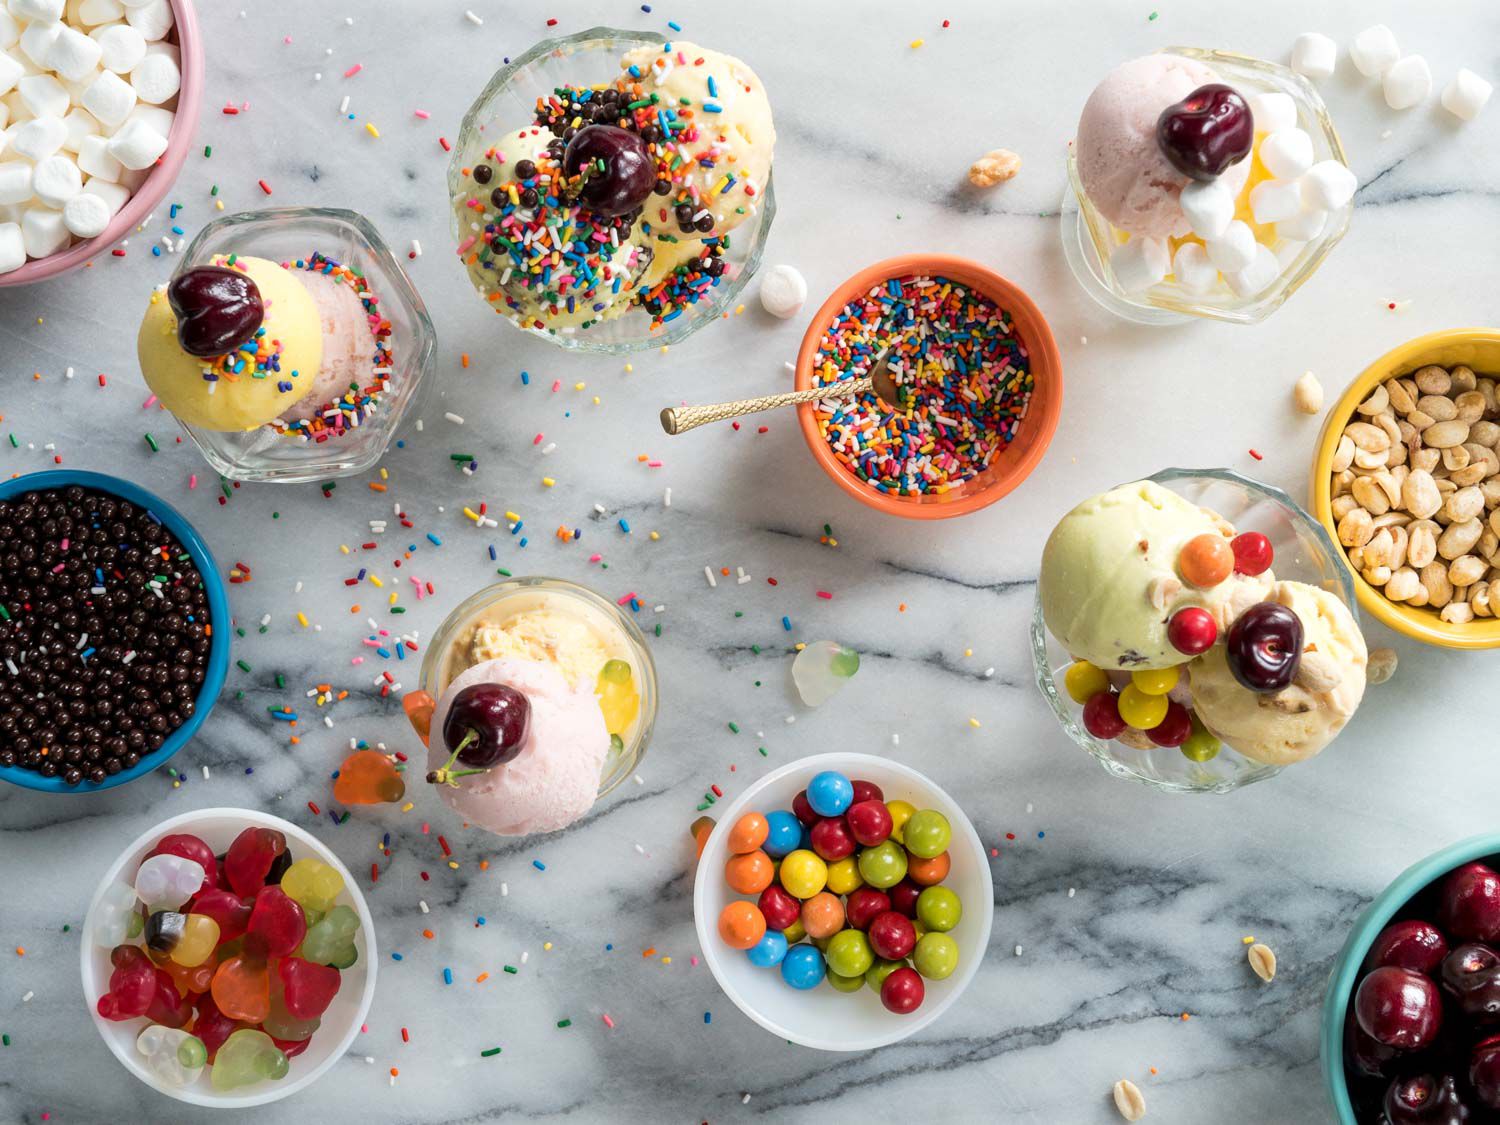 We Tested 10 Ice Cream Makers